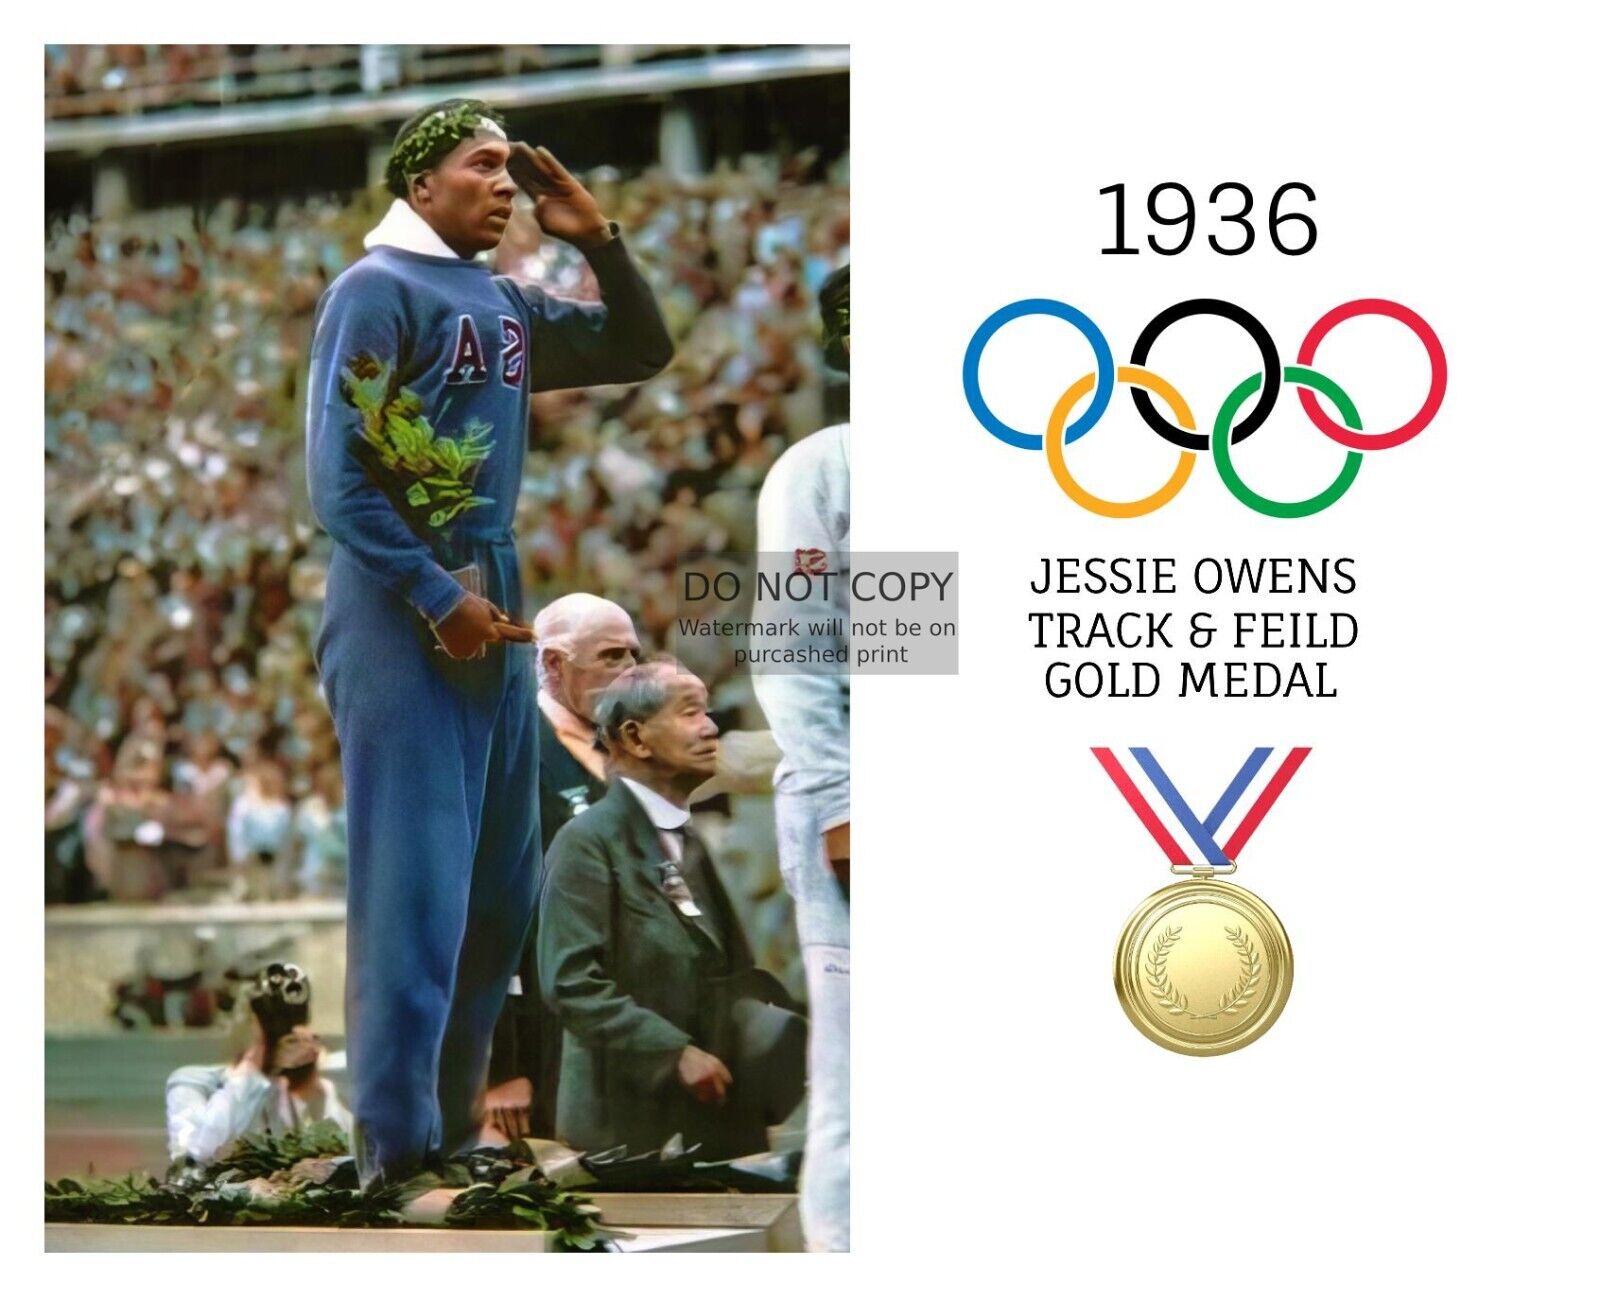 JESSIE OWENS STANDING ON PODIUM AT 1936 OLYMPICS BERLIN GERMANY 8X10 COLOR PHOTO